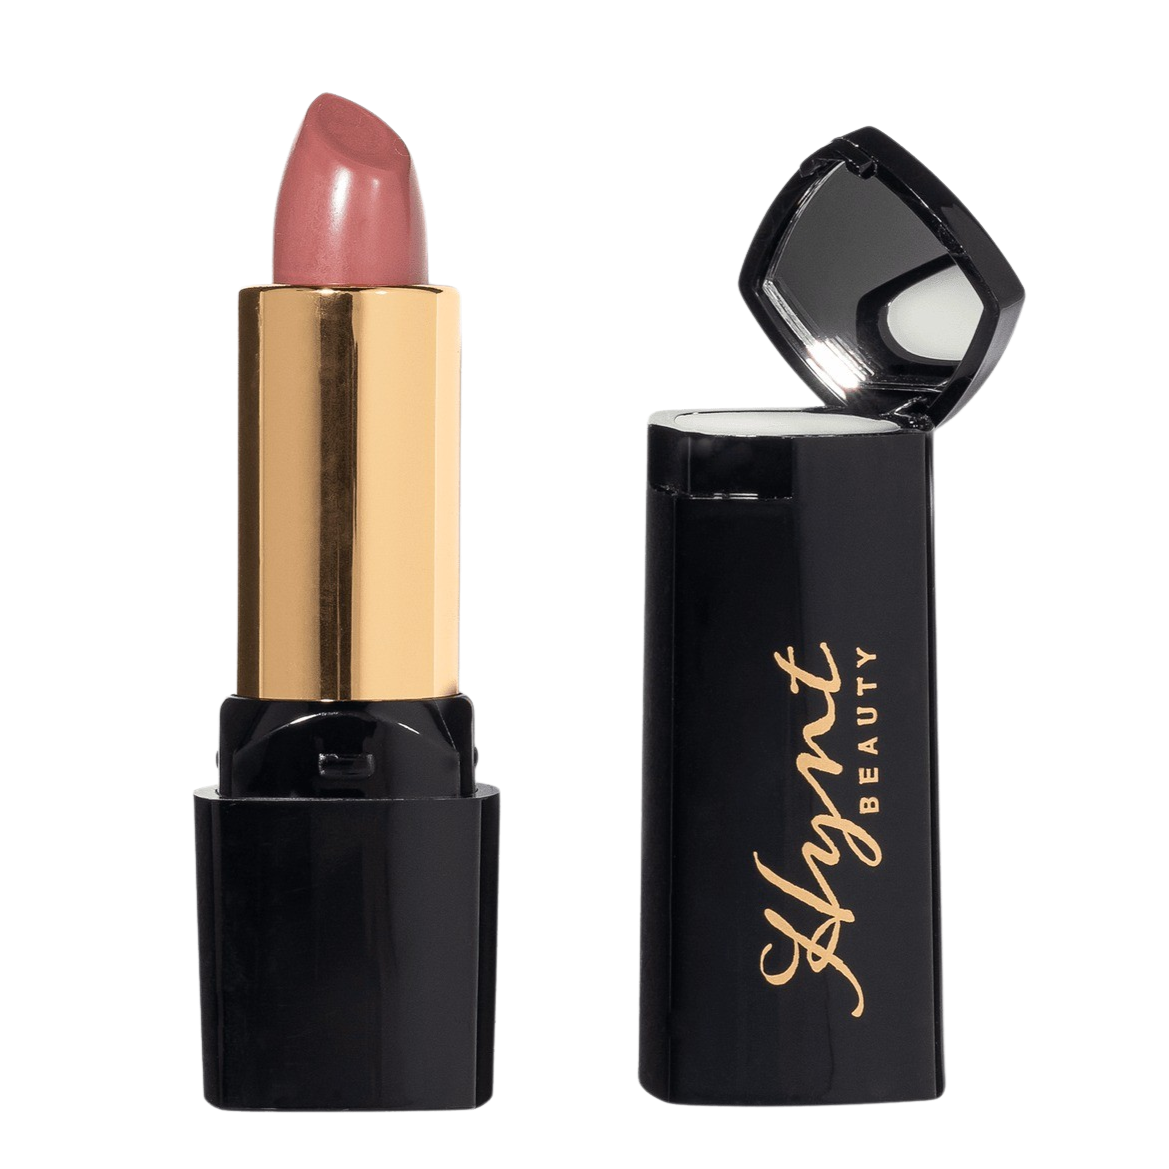 Load image into Gallery viewer, Hynt Beauty Aria Pure Lipstick
